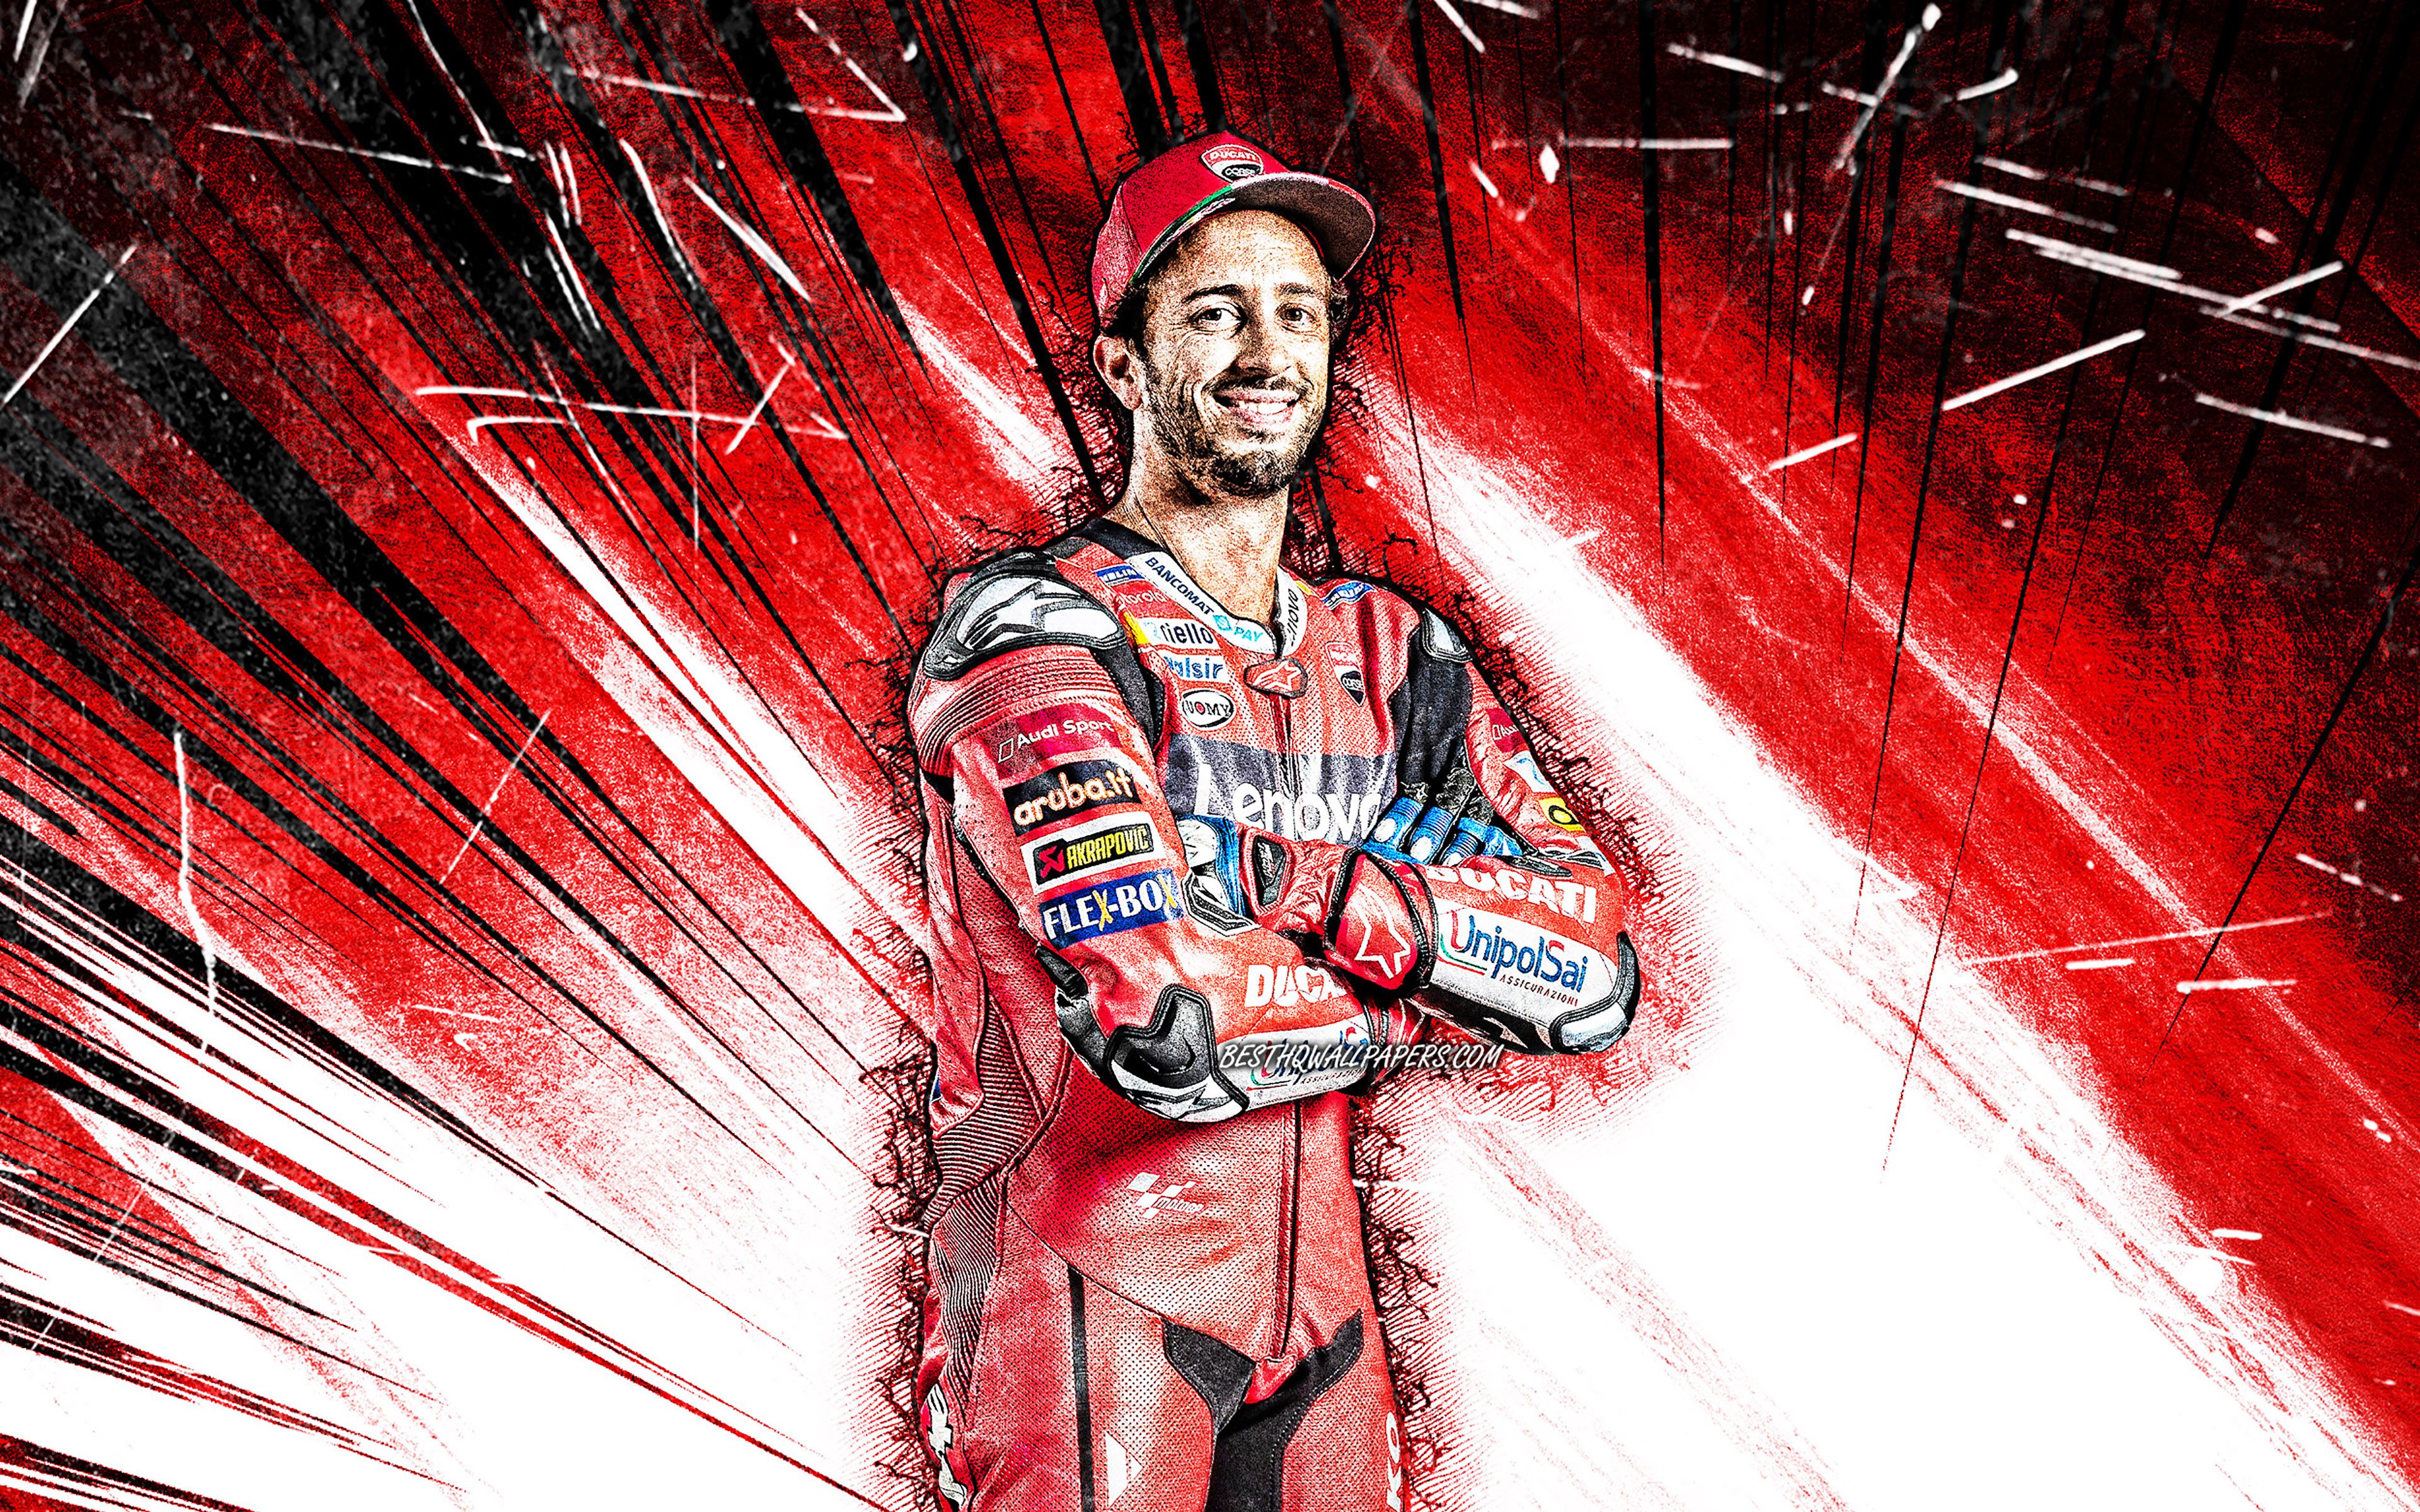 Download wallpaper 4k, Andrea Dovizioso, grunge art, Ducati Corse, italian motorcycle racer, MotoGP, red abstract rays, MotoGP World Championship, Andrea Dovizioso 4K for desktop with resolution 3840x2400. High Quality HD picture wallpaper